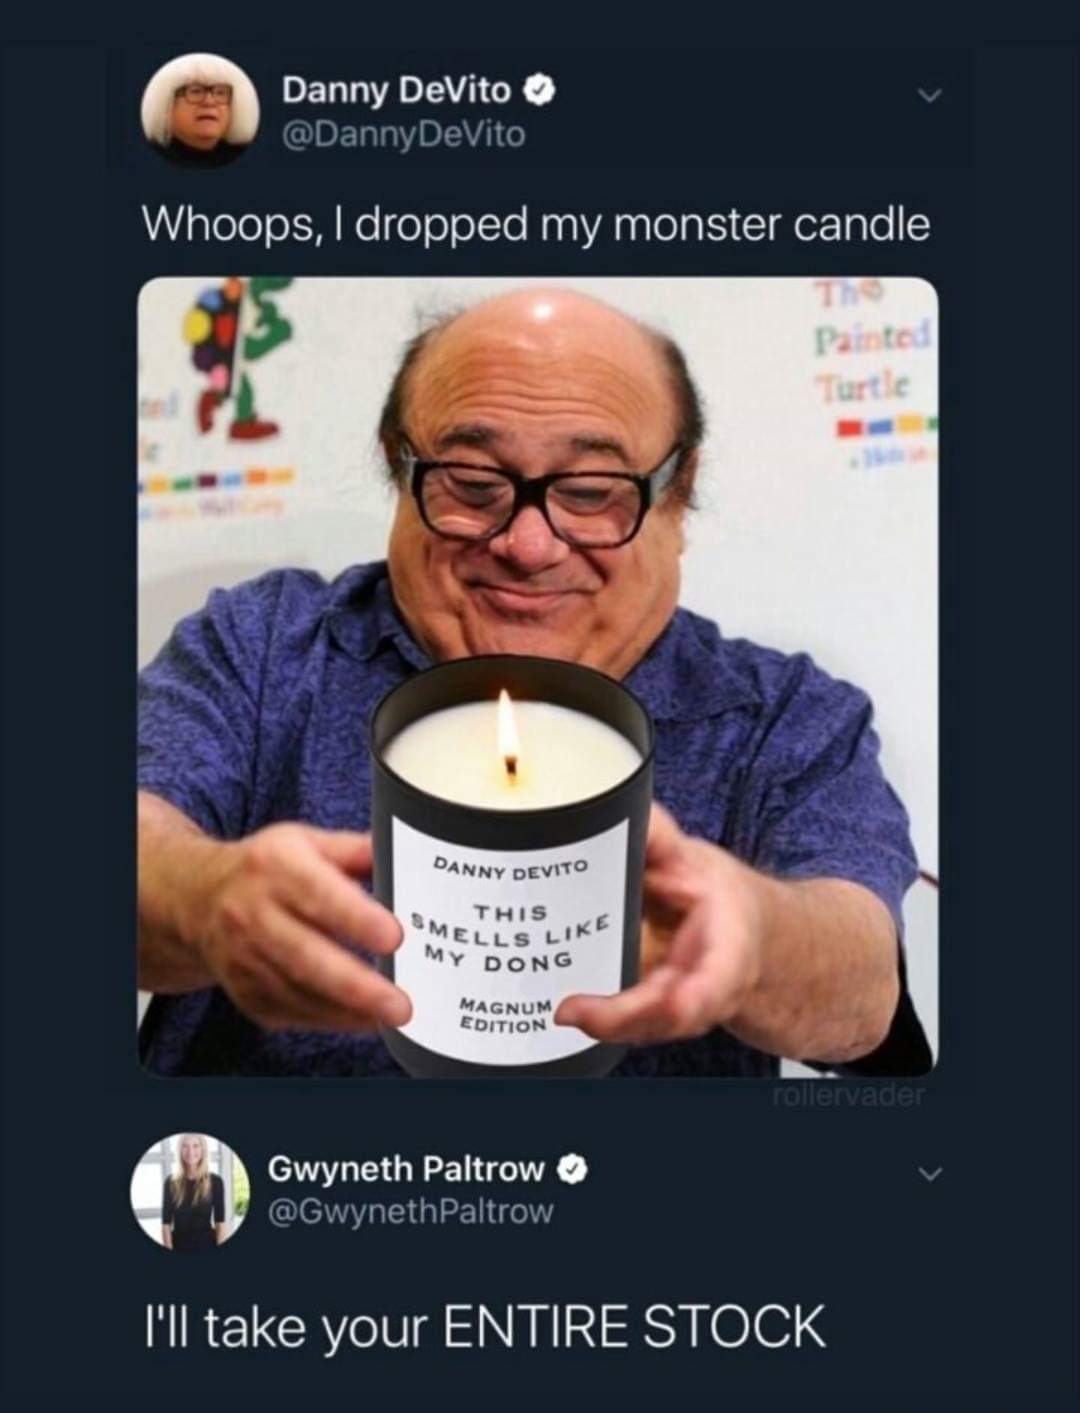 photo caption - Danny DeVito DeVito Whoops, I dropped my monster candle Painted Turtle Danny Devito Smel This My Dong S Magnum Edition rollervader Gwyneth Paltrow Paltrow, I'll take your Entire Stock